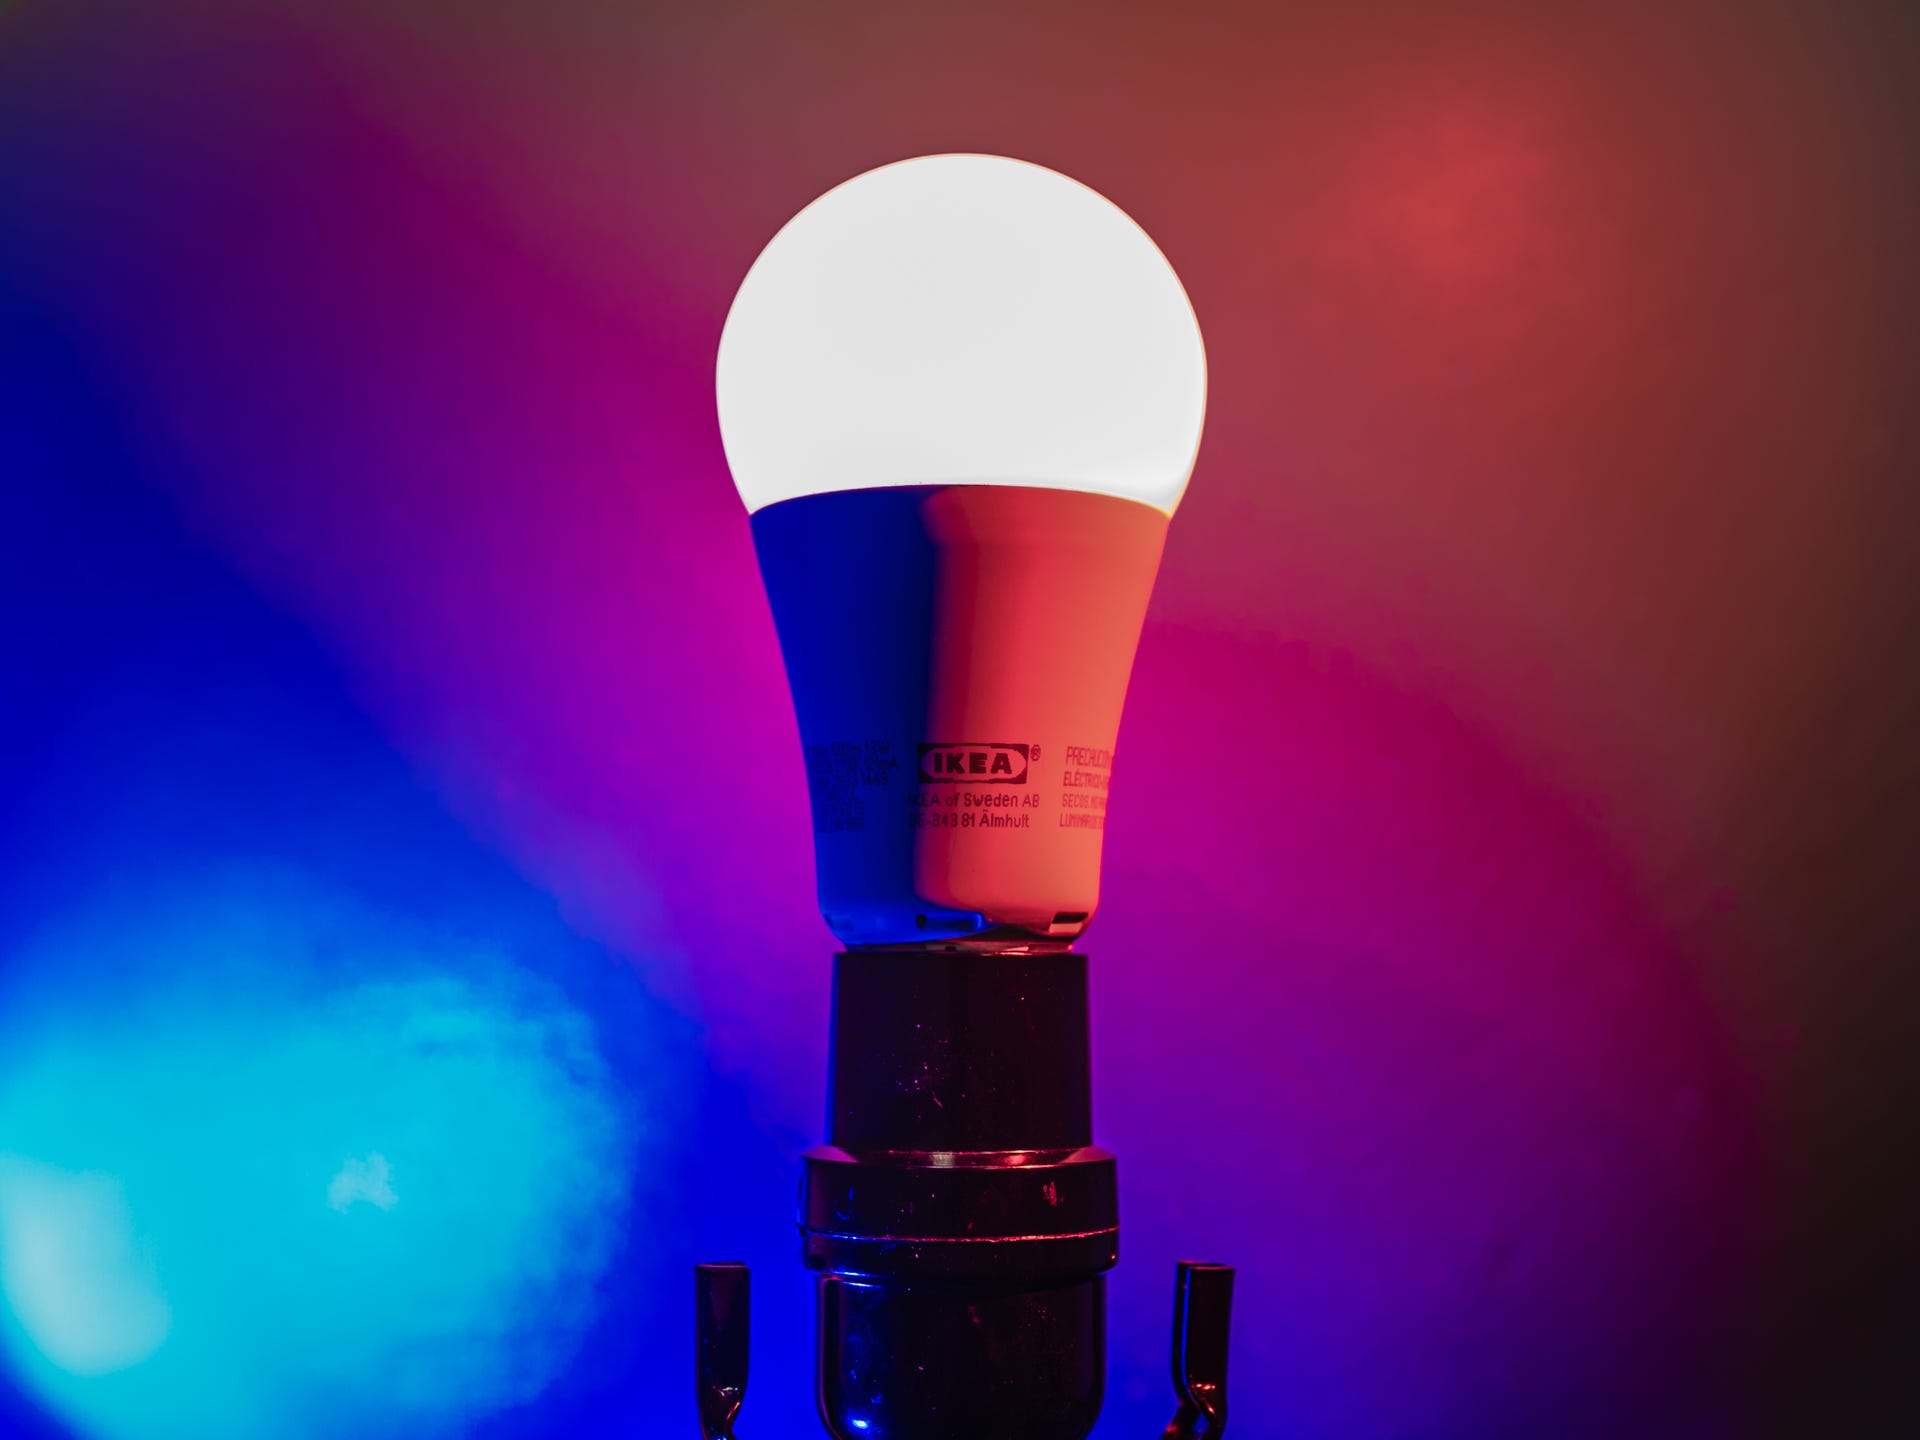 Ikea Ledare LED (1000L) review: brighter bulb shines in more ways than one - CNET